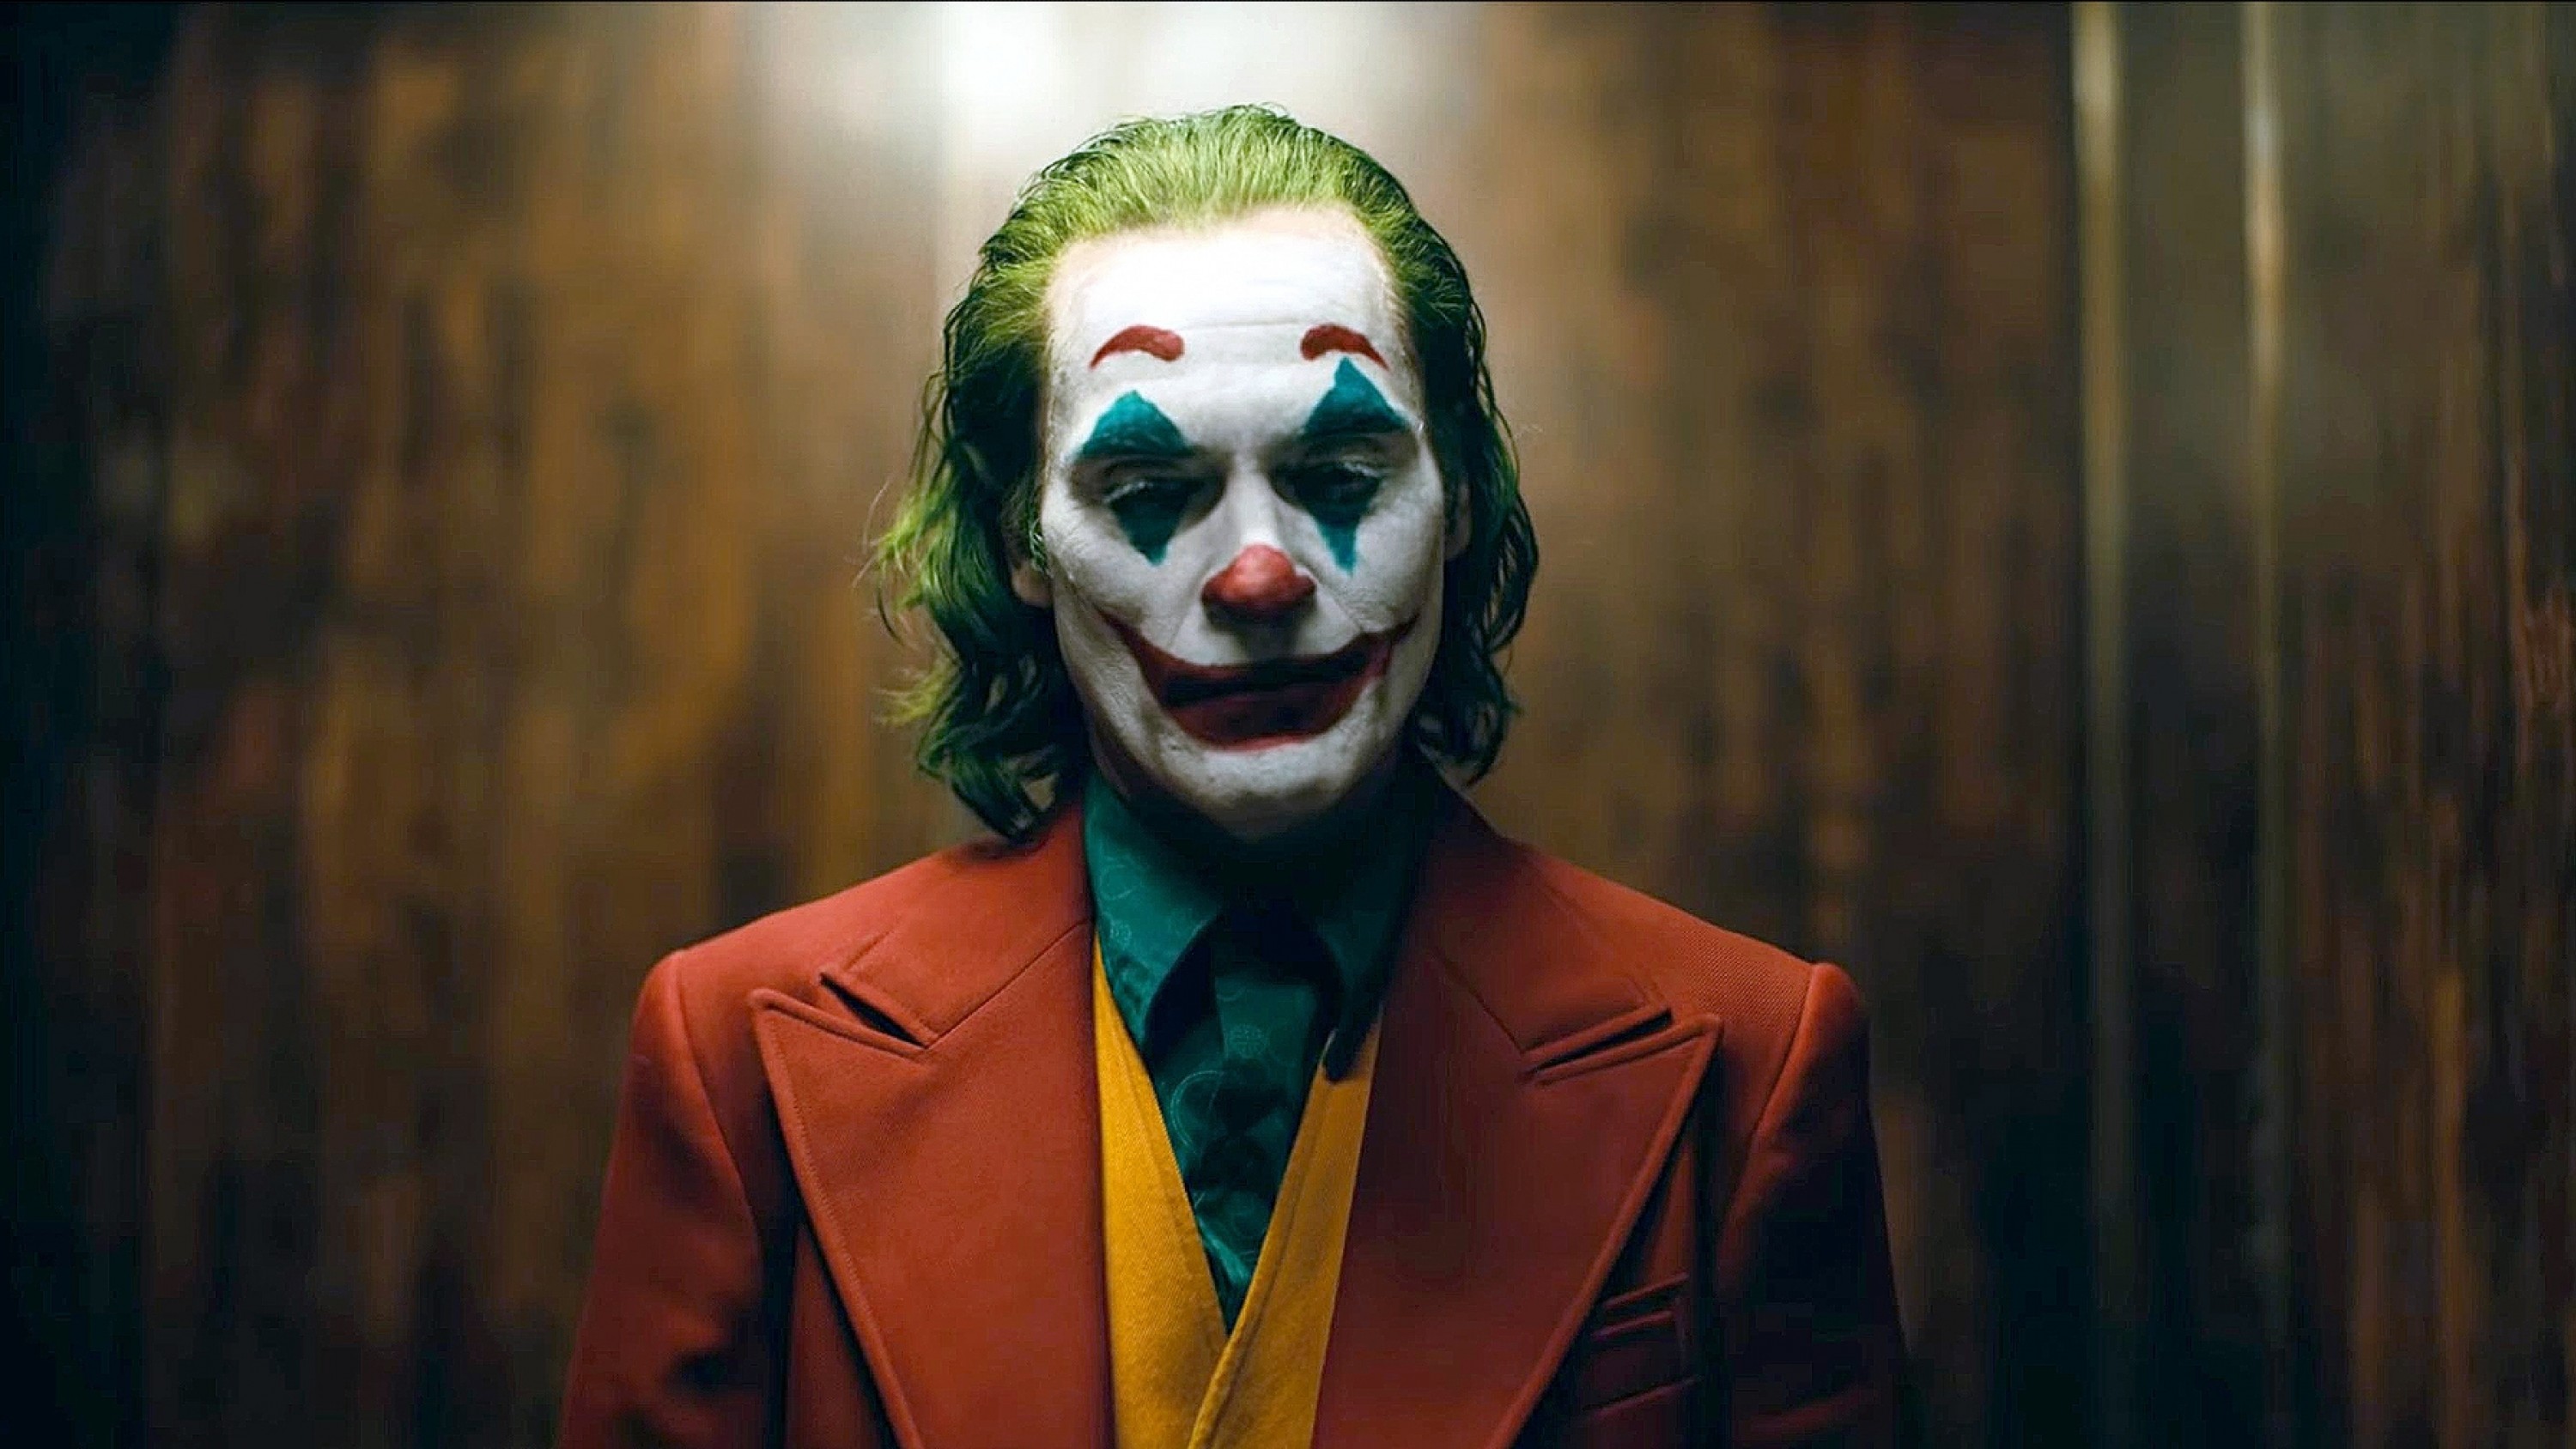 A film guide that looks at Joker (2019), exploring its key topics and theme